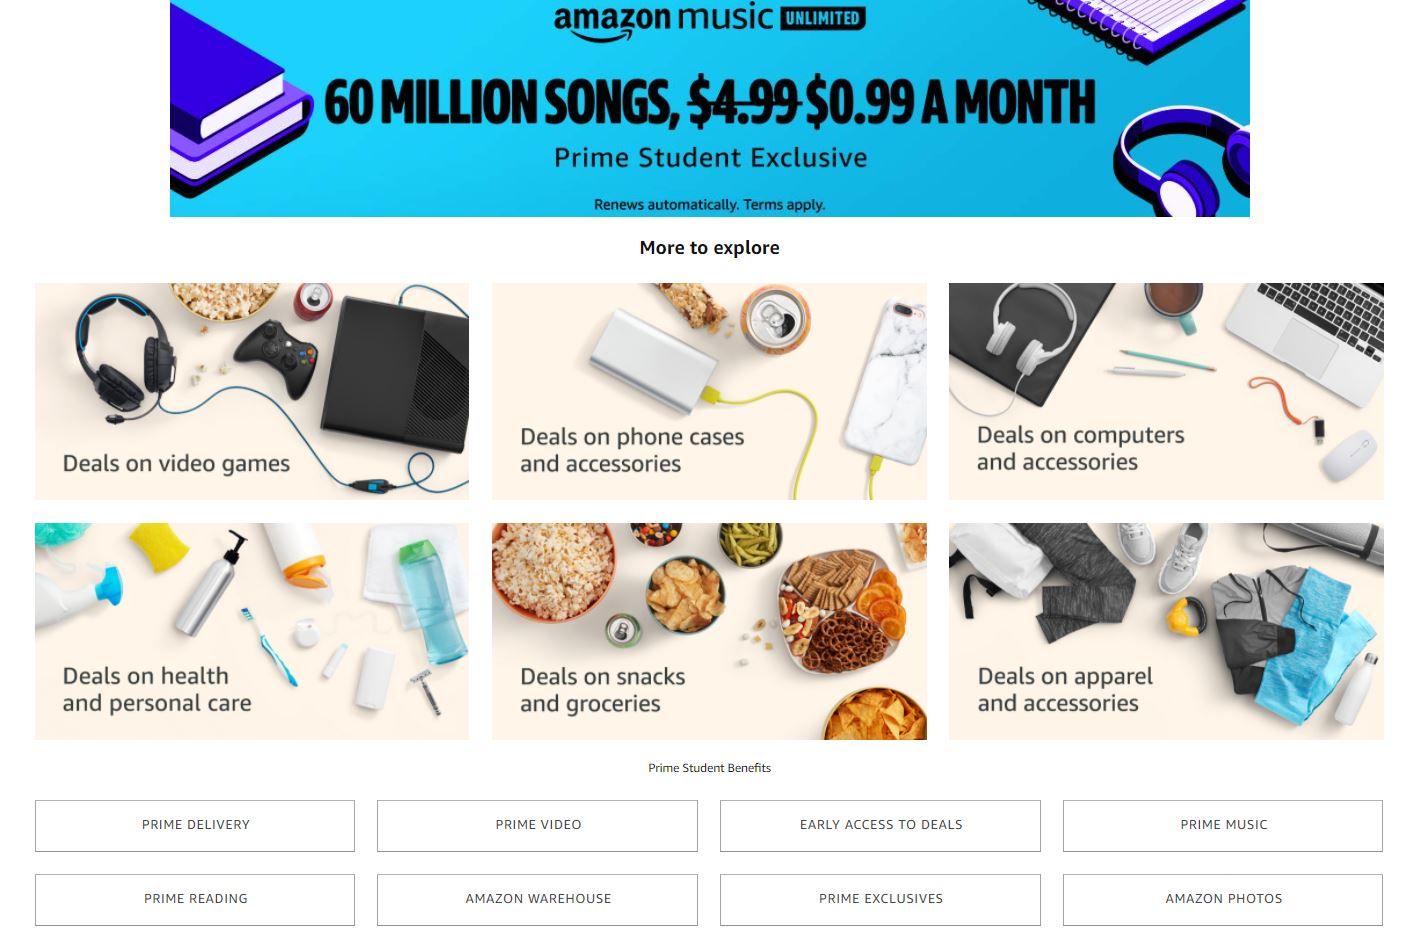 Prime Student cost: how to get the school discount